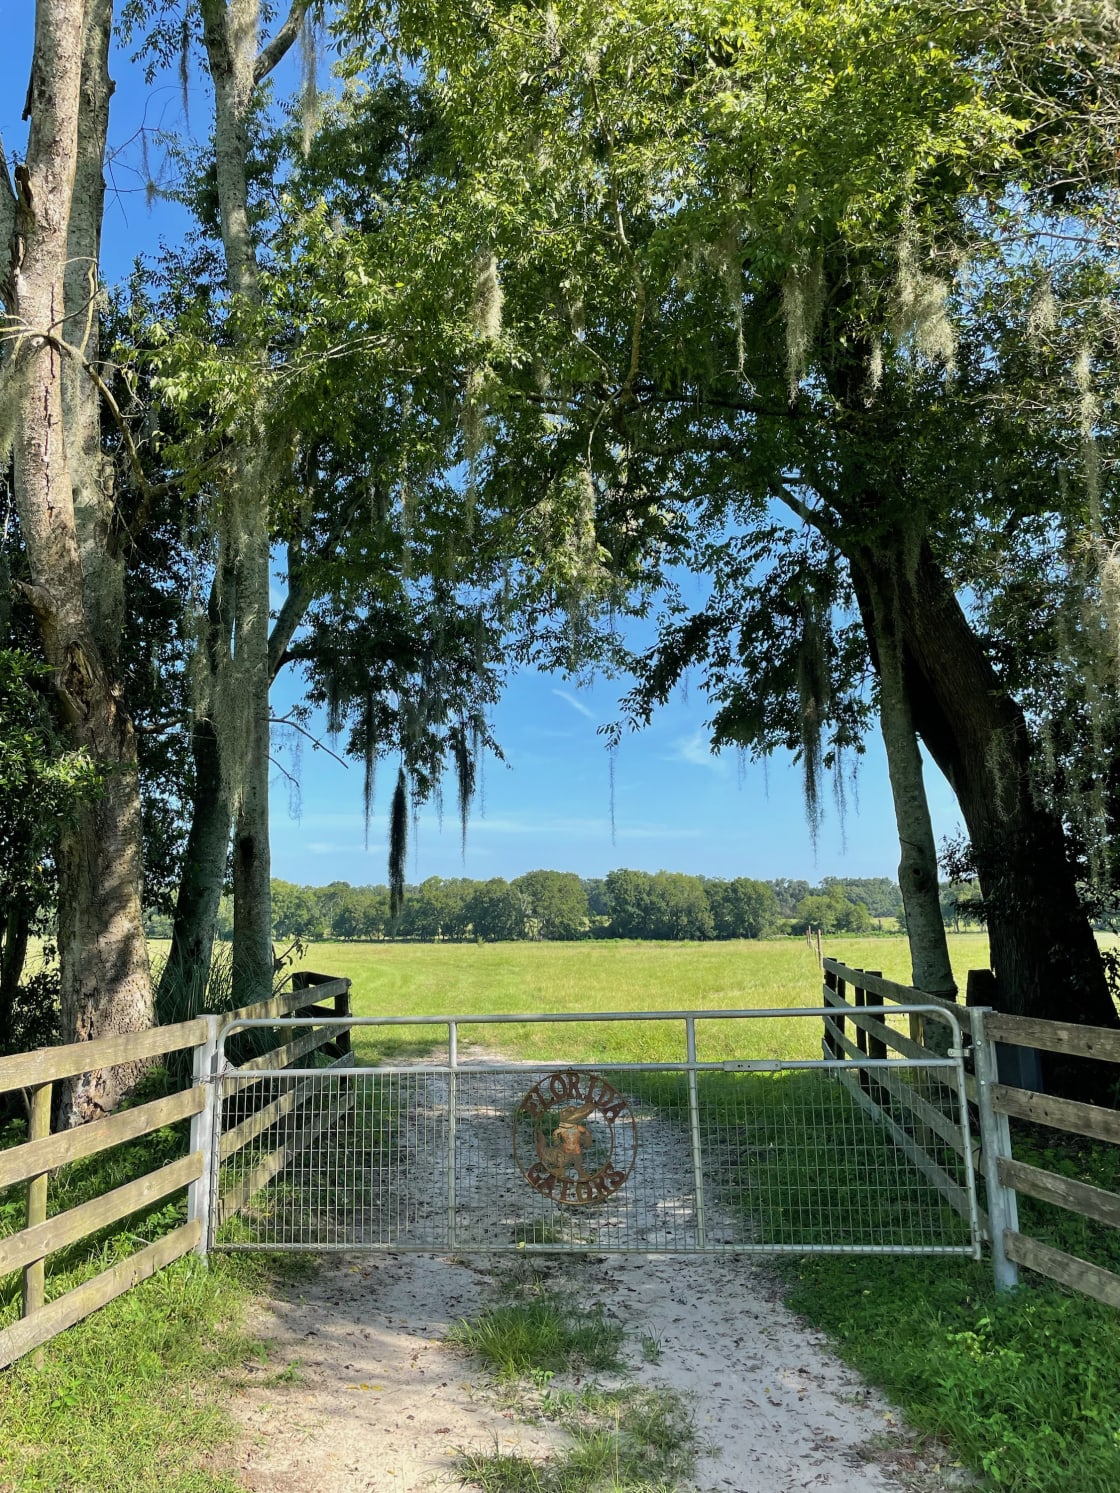 Entrance to the Cattle Pasture